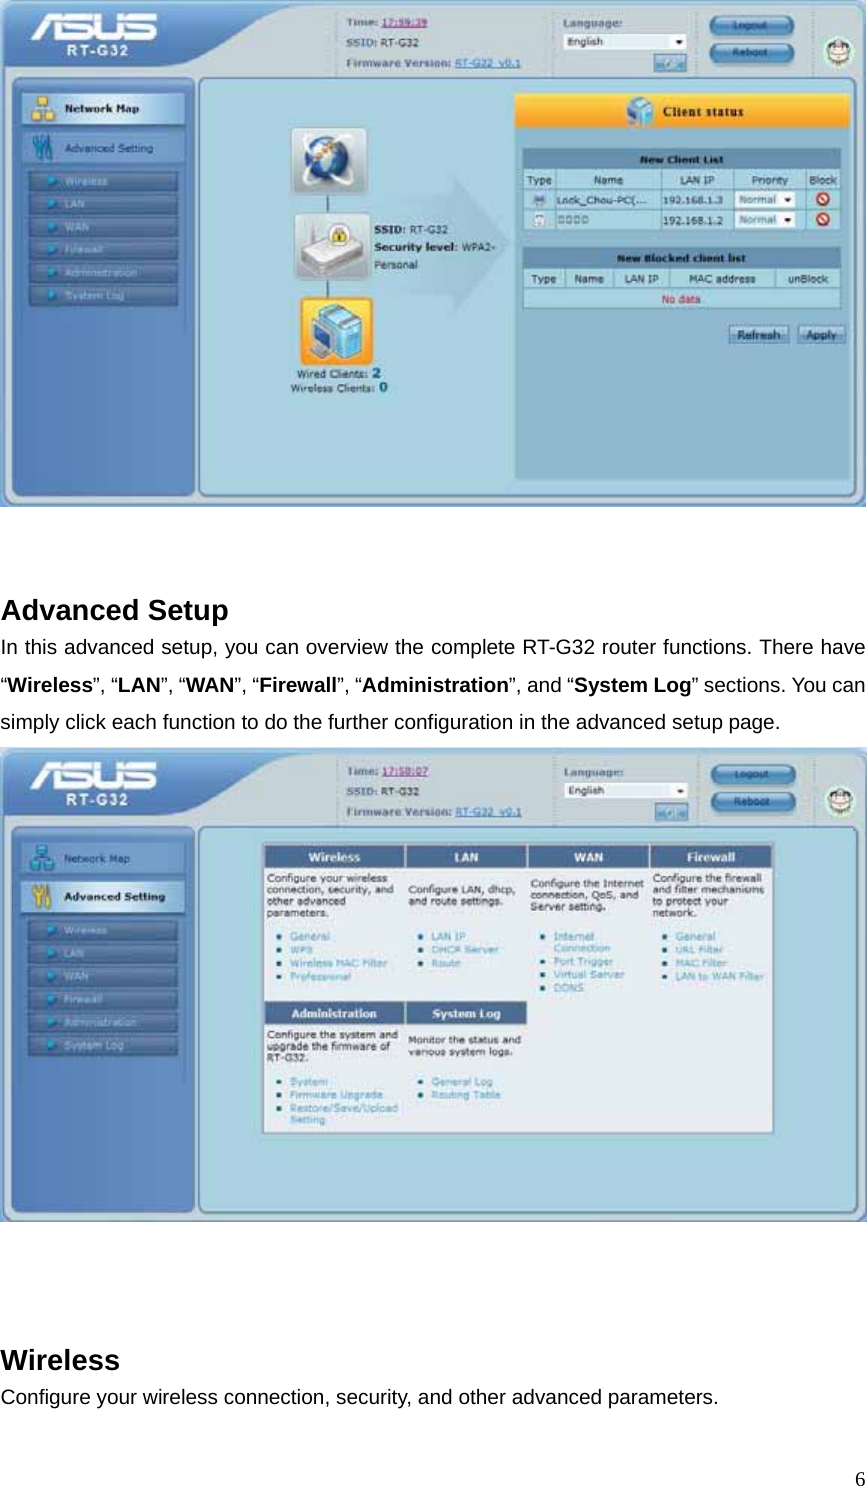  6   Advanced Setup In this advanced setup, you can overview the complete RT-G32 router functions. There have “Wireless”, “LAN”, “WAN”, “Firewall”, “Administration”, and “System Log” sections. You can simply click each function to do the further configuration in the advanced setup page.     Wireless Configure your wireless connection, security, and other advanced parameters. 